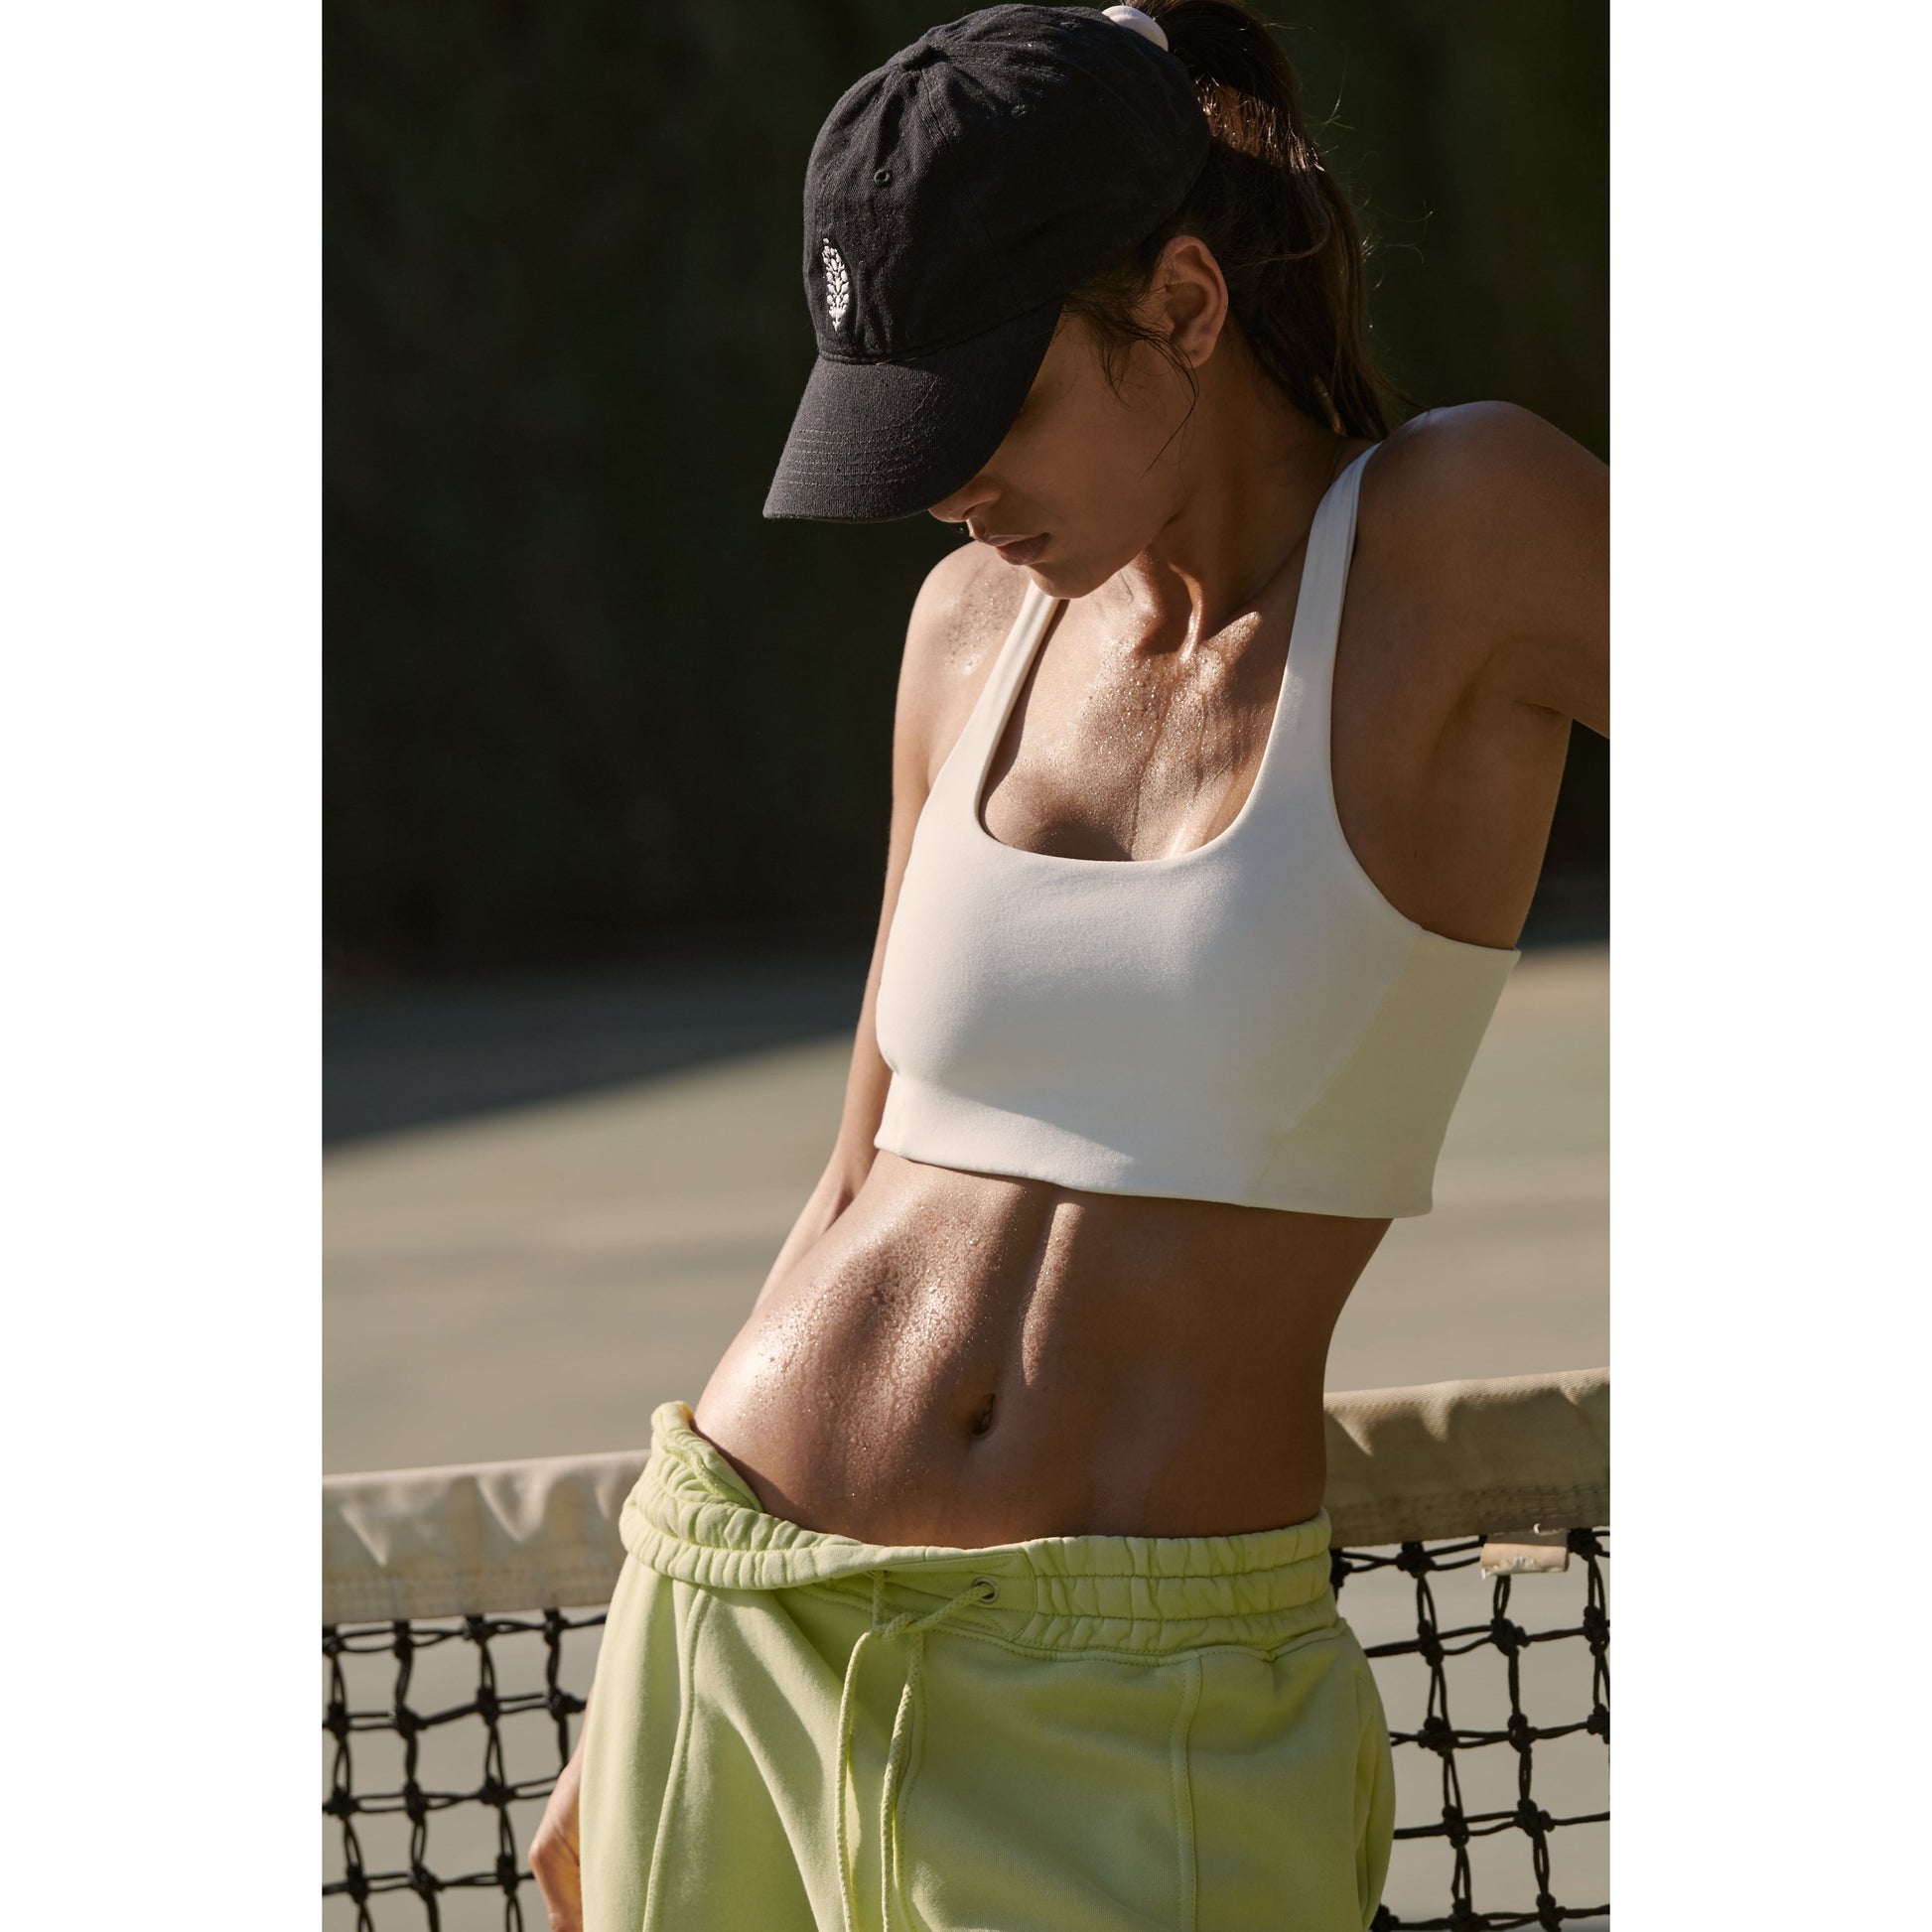 A woman in sportswear, including a Free People Movement Never Better SQ Neck Bra in white and yellow shorts, leaning on a tennis net, visibly perspiring, in a sunlit outdoor setting.